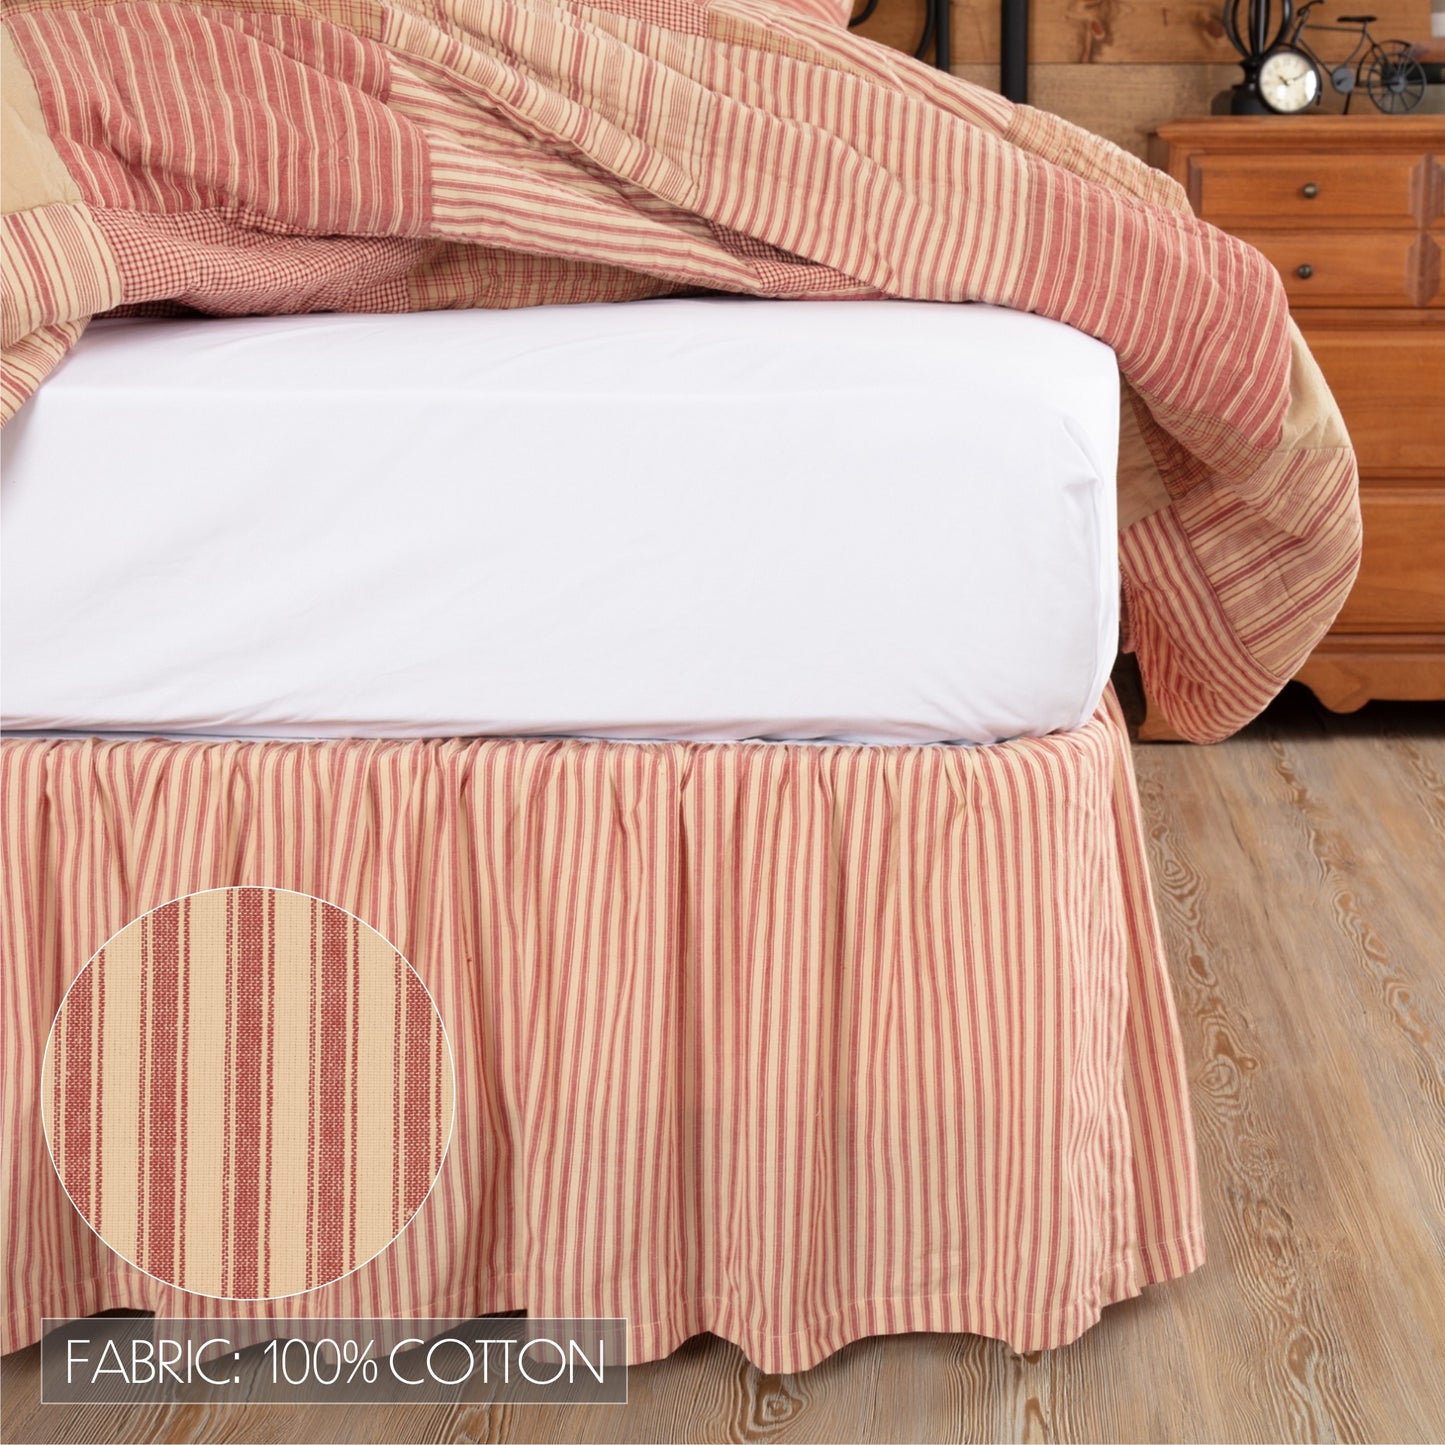 51949-Sawyer-Mill-Red-Ticking-Stripe-Queen-Bed-Skirt-60x80x16-image-2